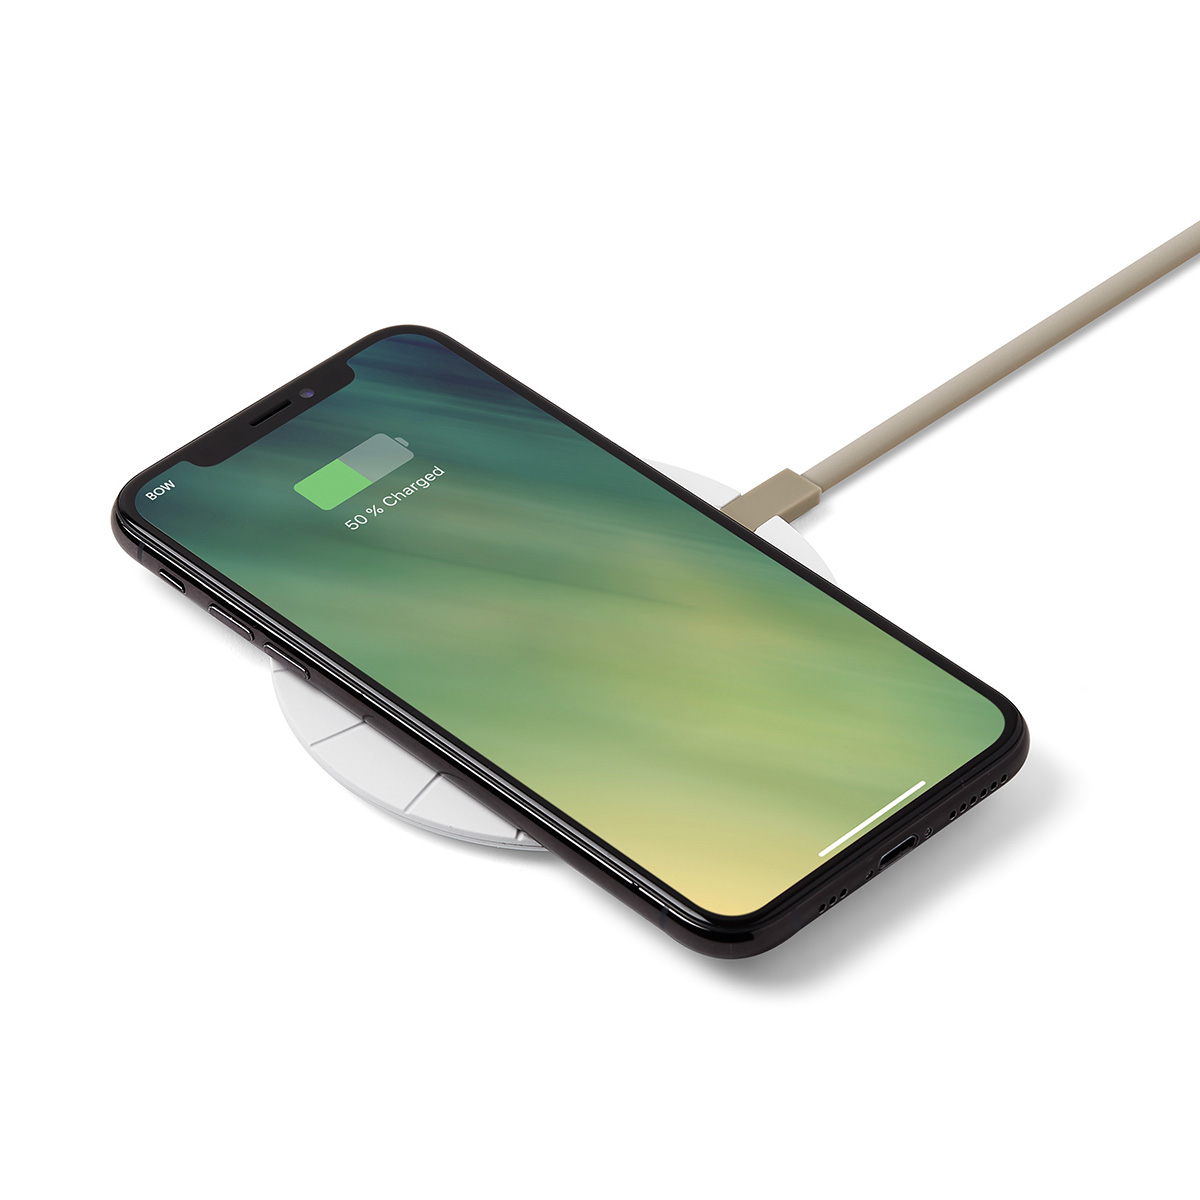 Bali Extra-Slim Wireless Charger LL126